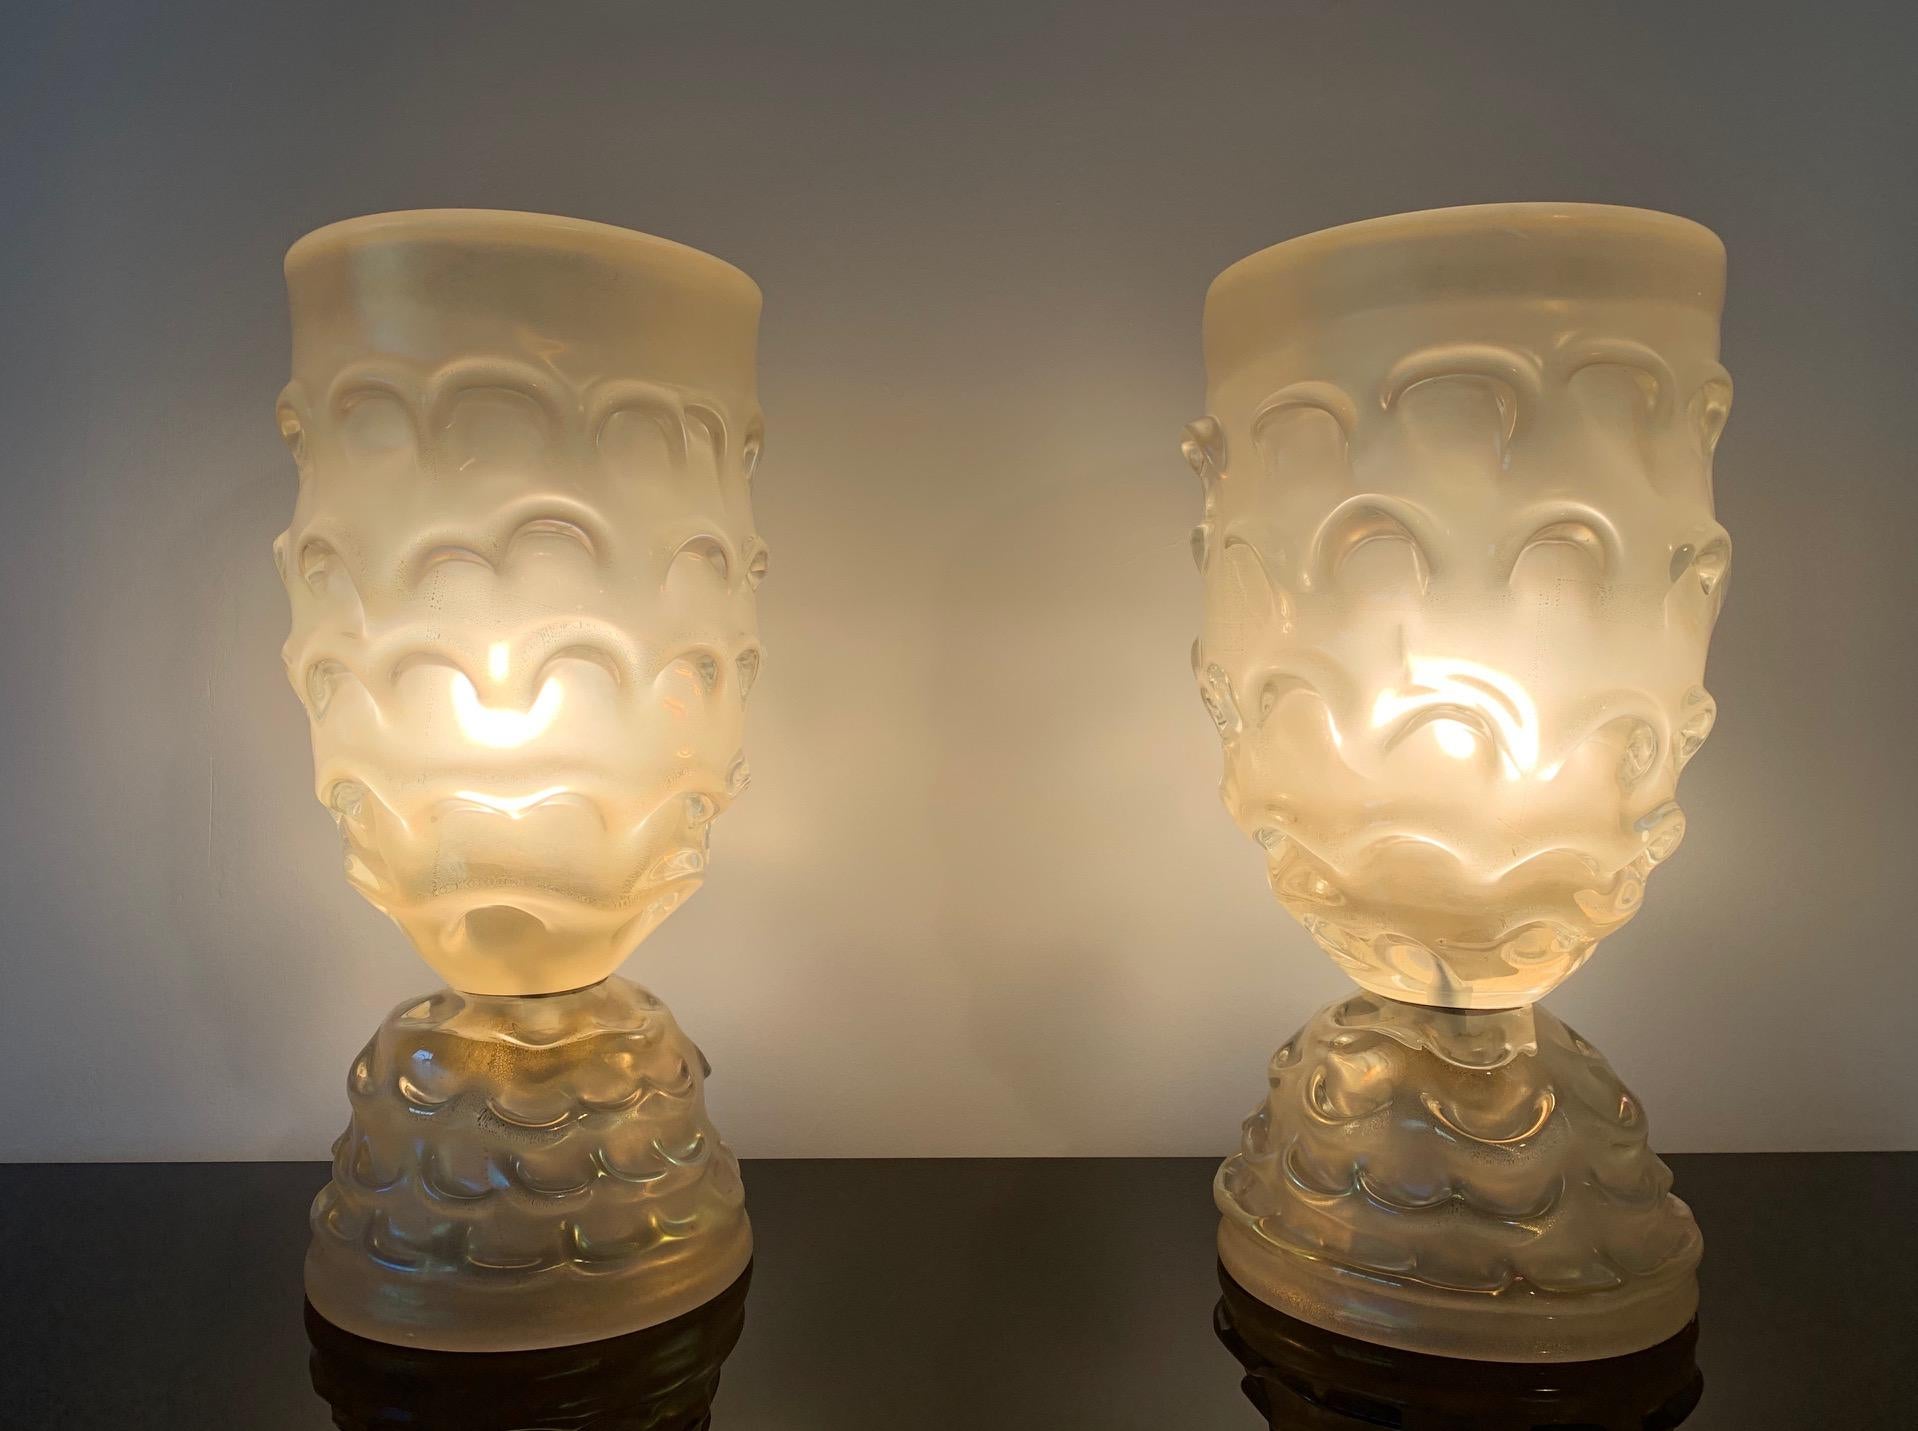 This pair of large vase or urn lamps was produced in 2018 in Murano, Italy.